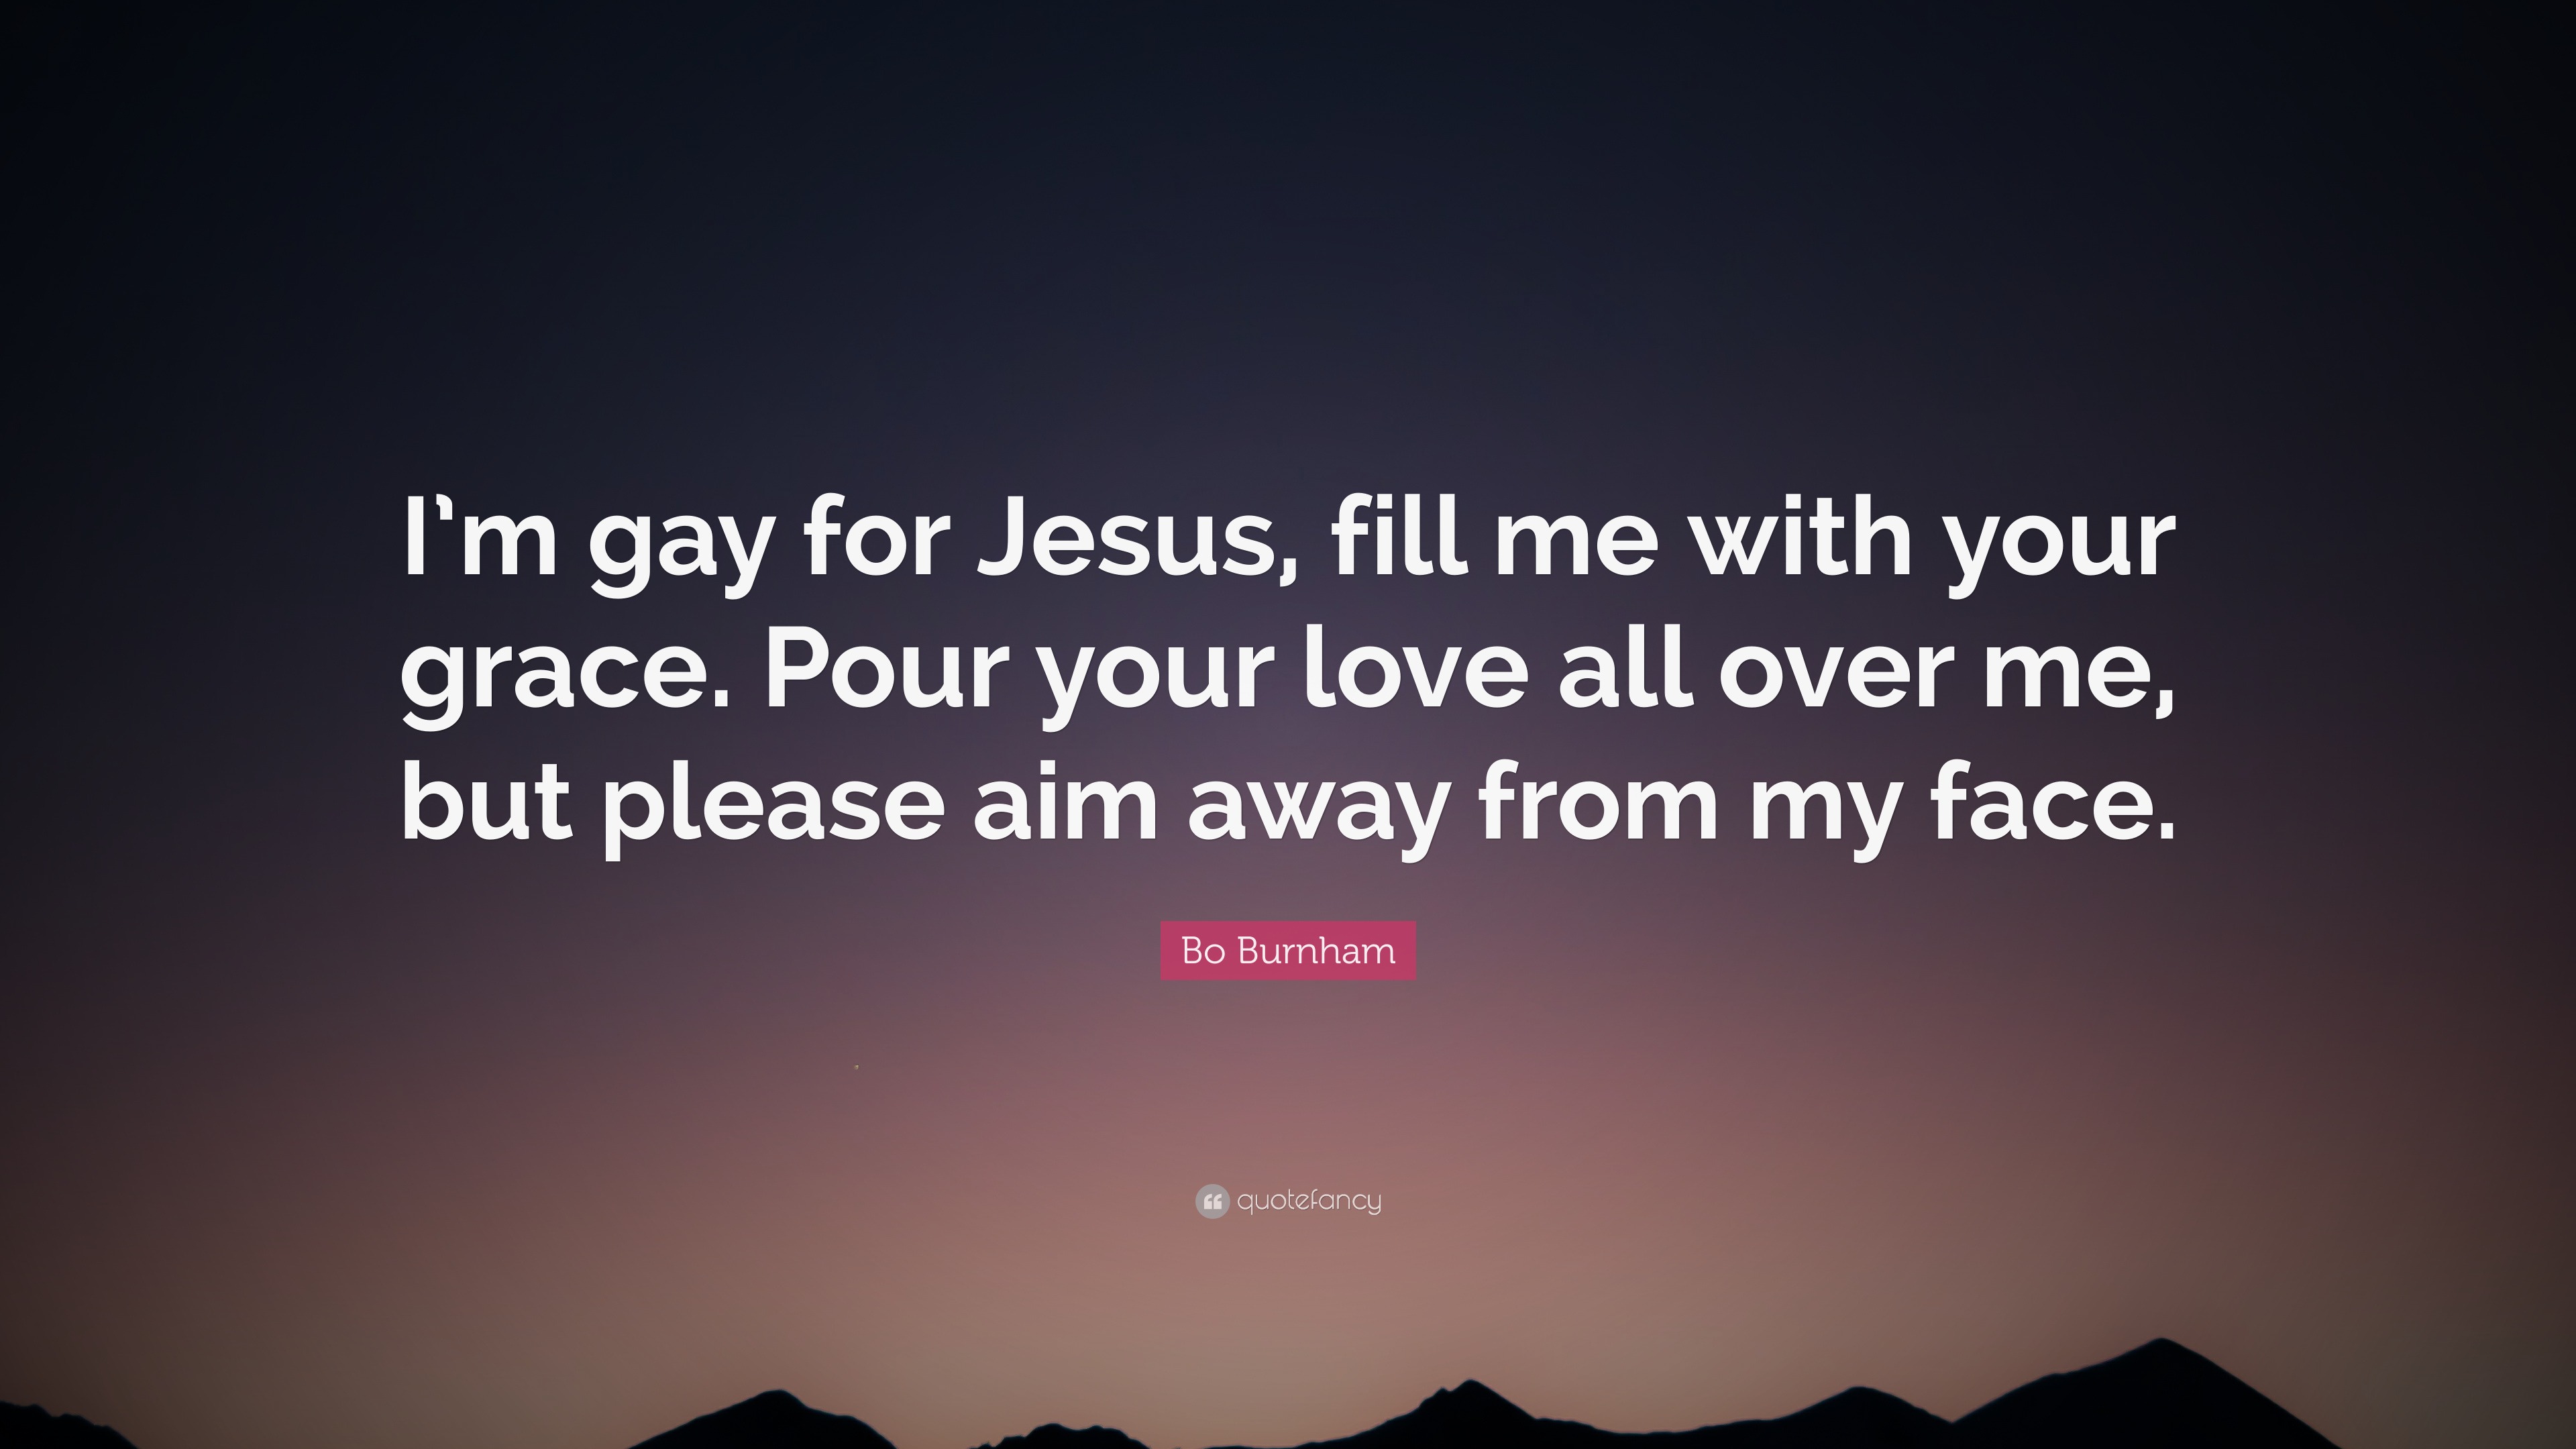 Bo Burnham Quote “I m for Jesus fill me with your